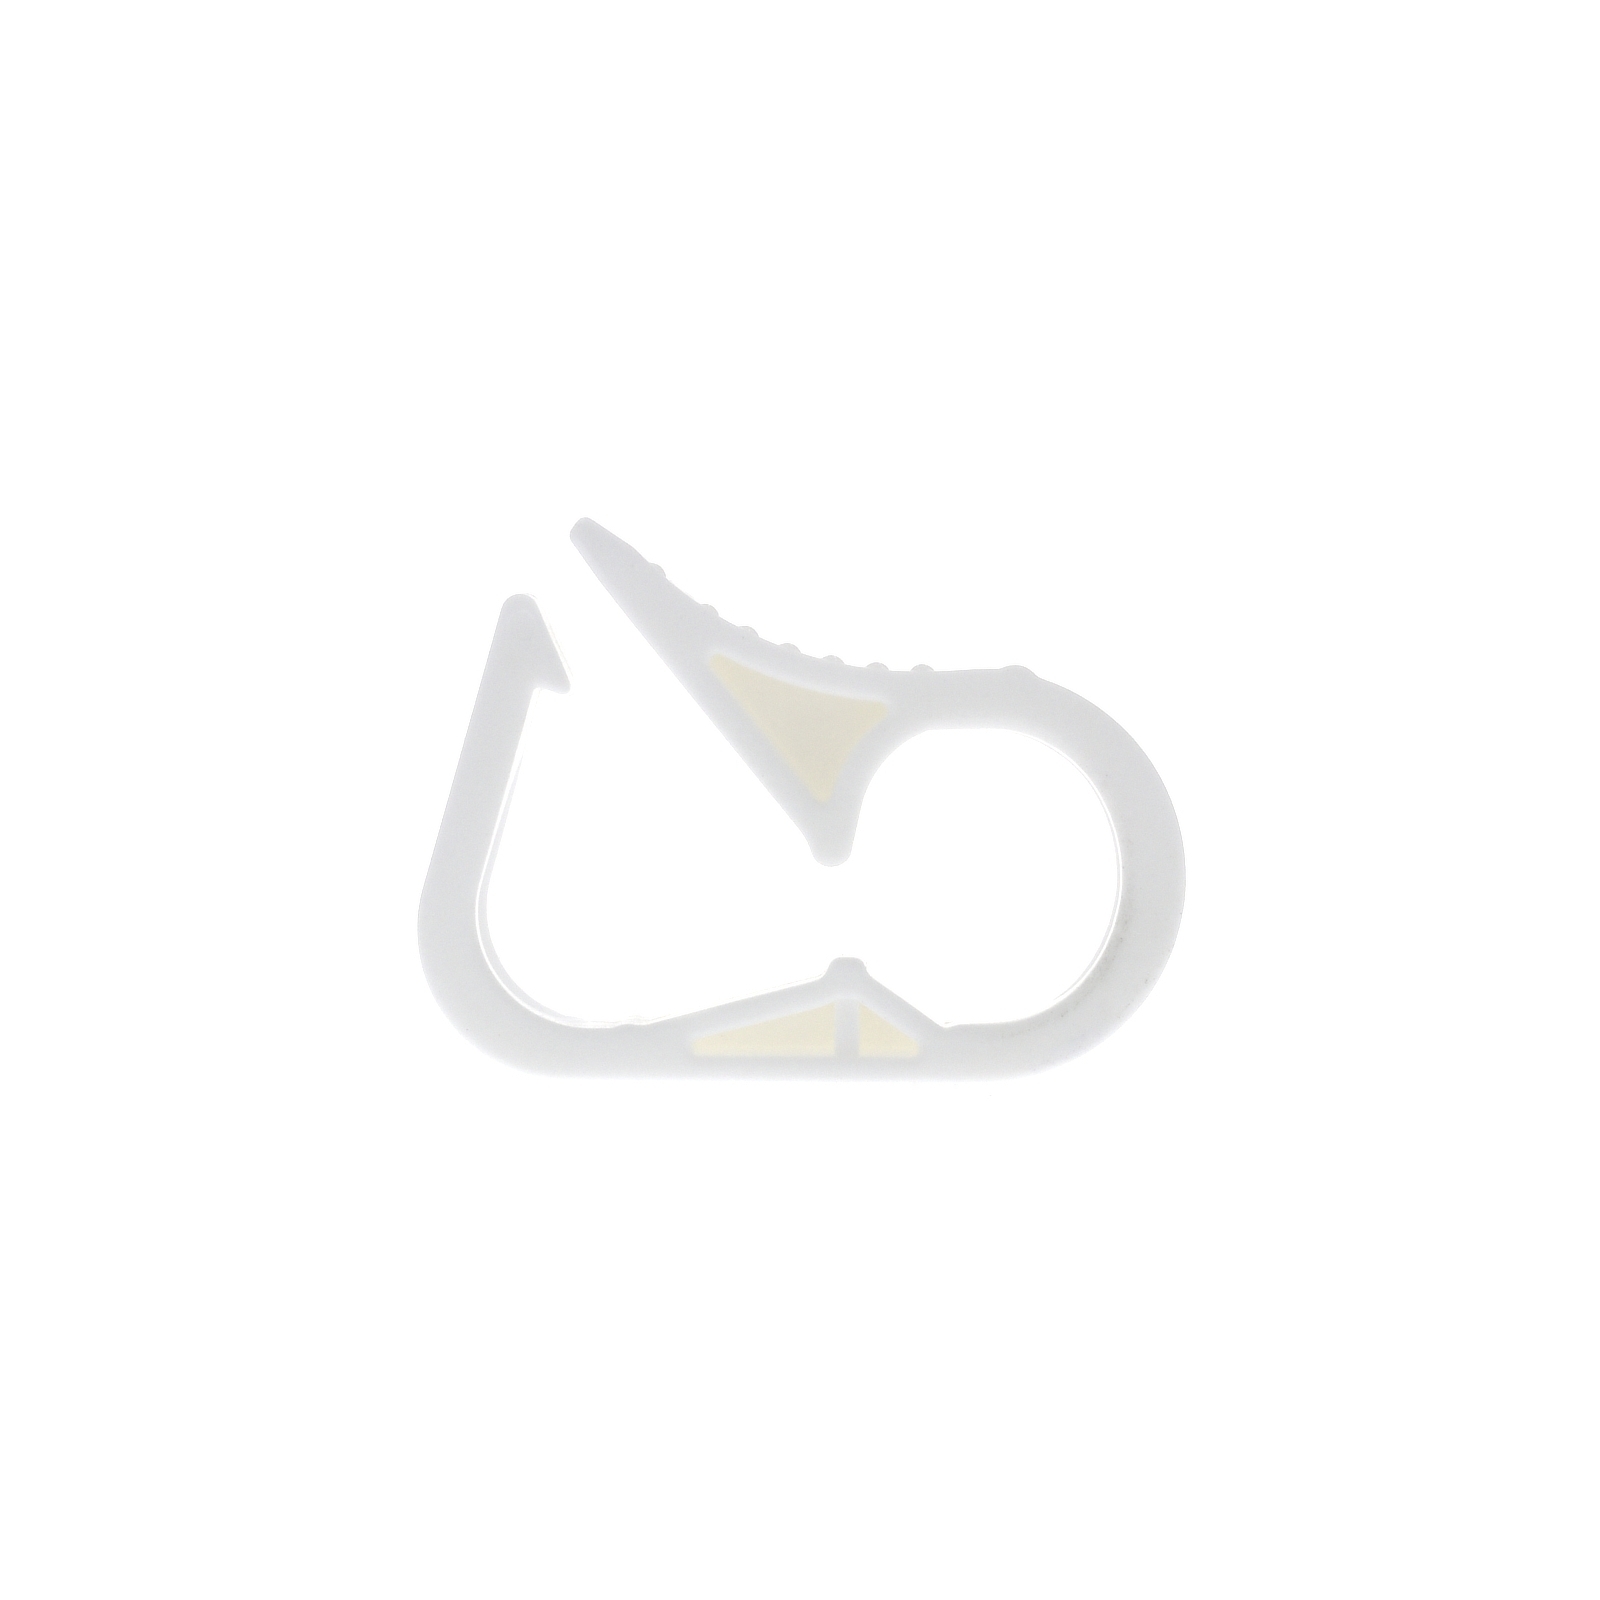 muroplas component white pinch clamp medical device